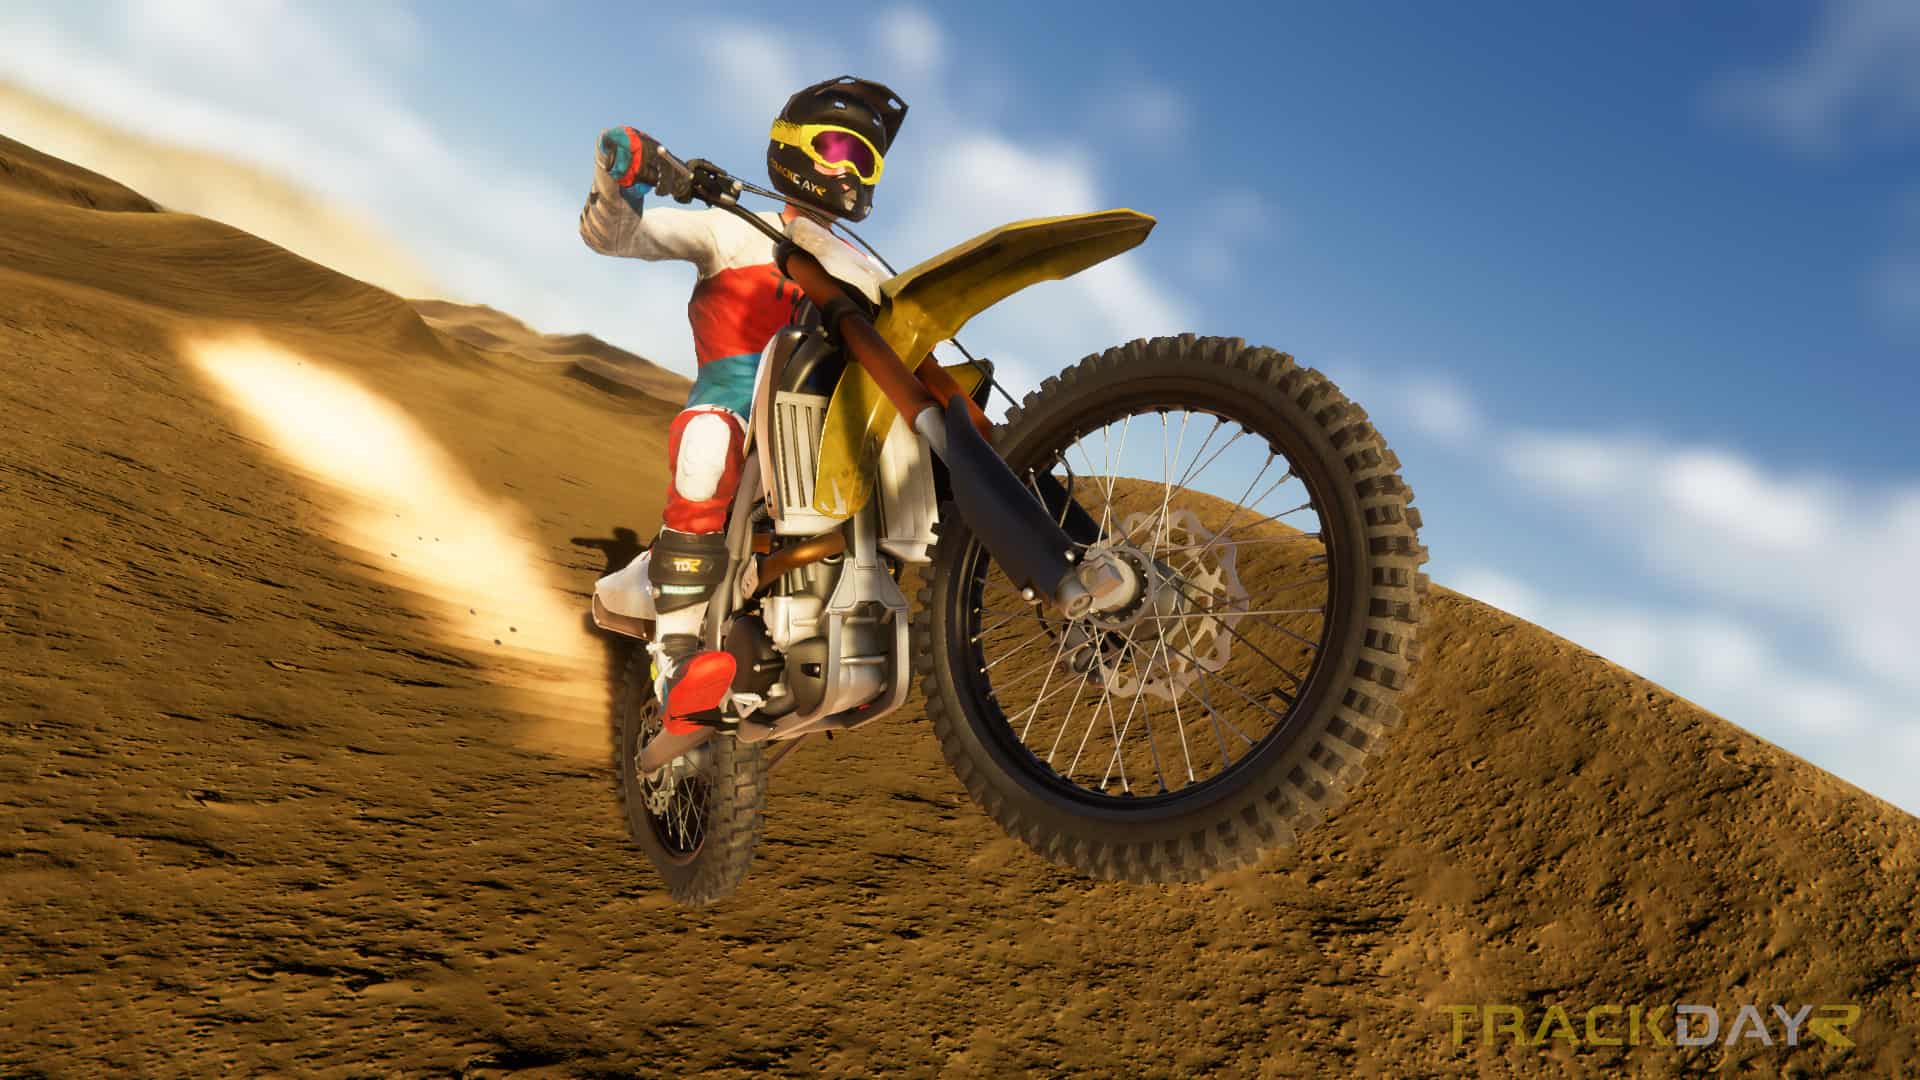 TrackDayR update adds dirt bikes, motocross tracks and new riding physics 